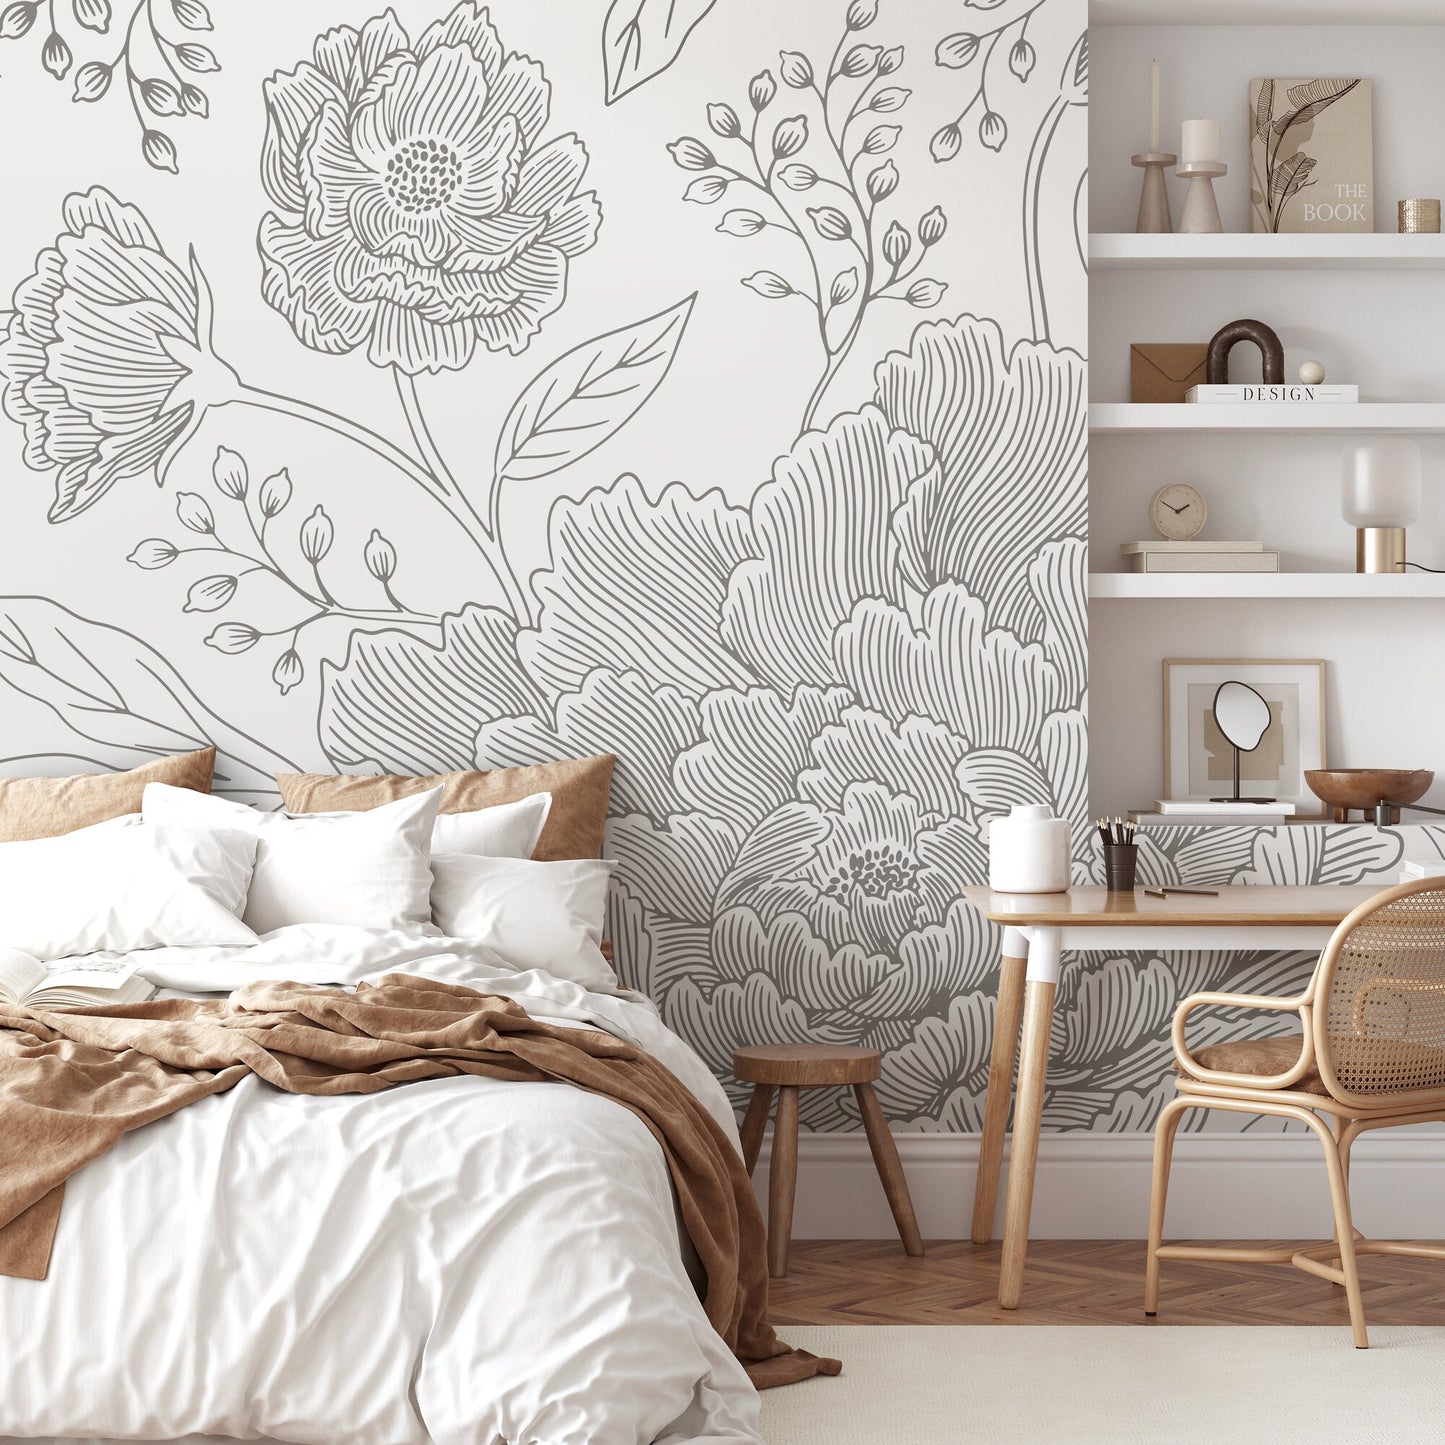 Gray Large Floral Wallpaper / Peel and Stick Wallpaper Removable Wallpaper Home Decor Wall Art Wall Decor Room Decor - C924